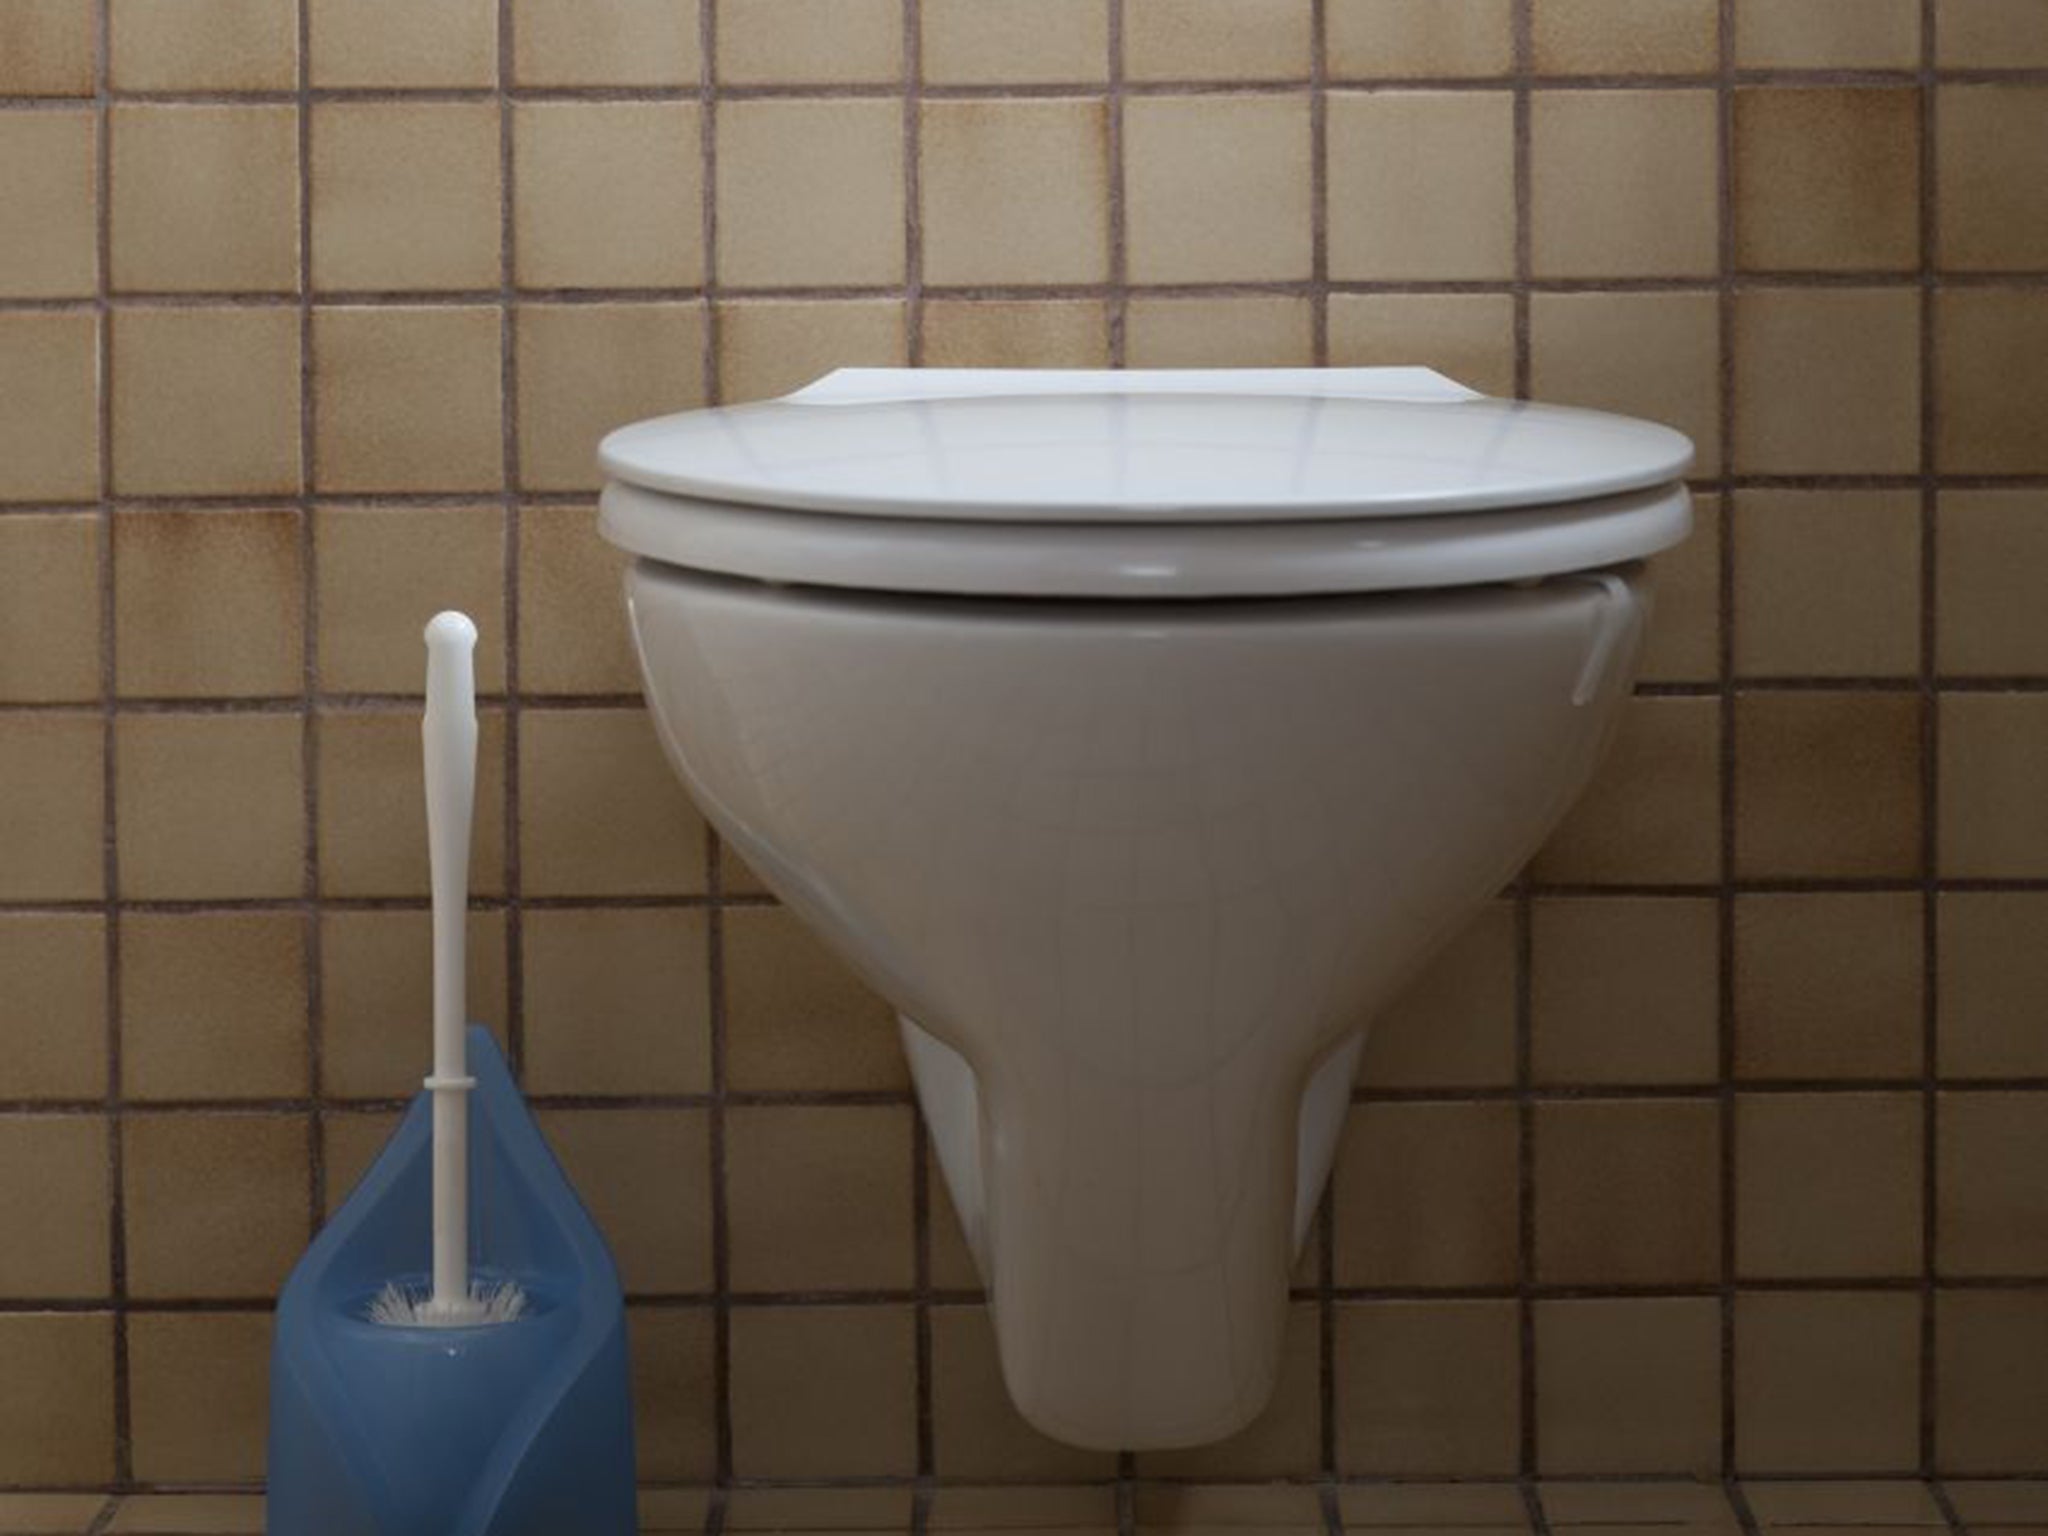 Your toilet seat may not be the grossest thing in your house